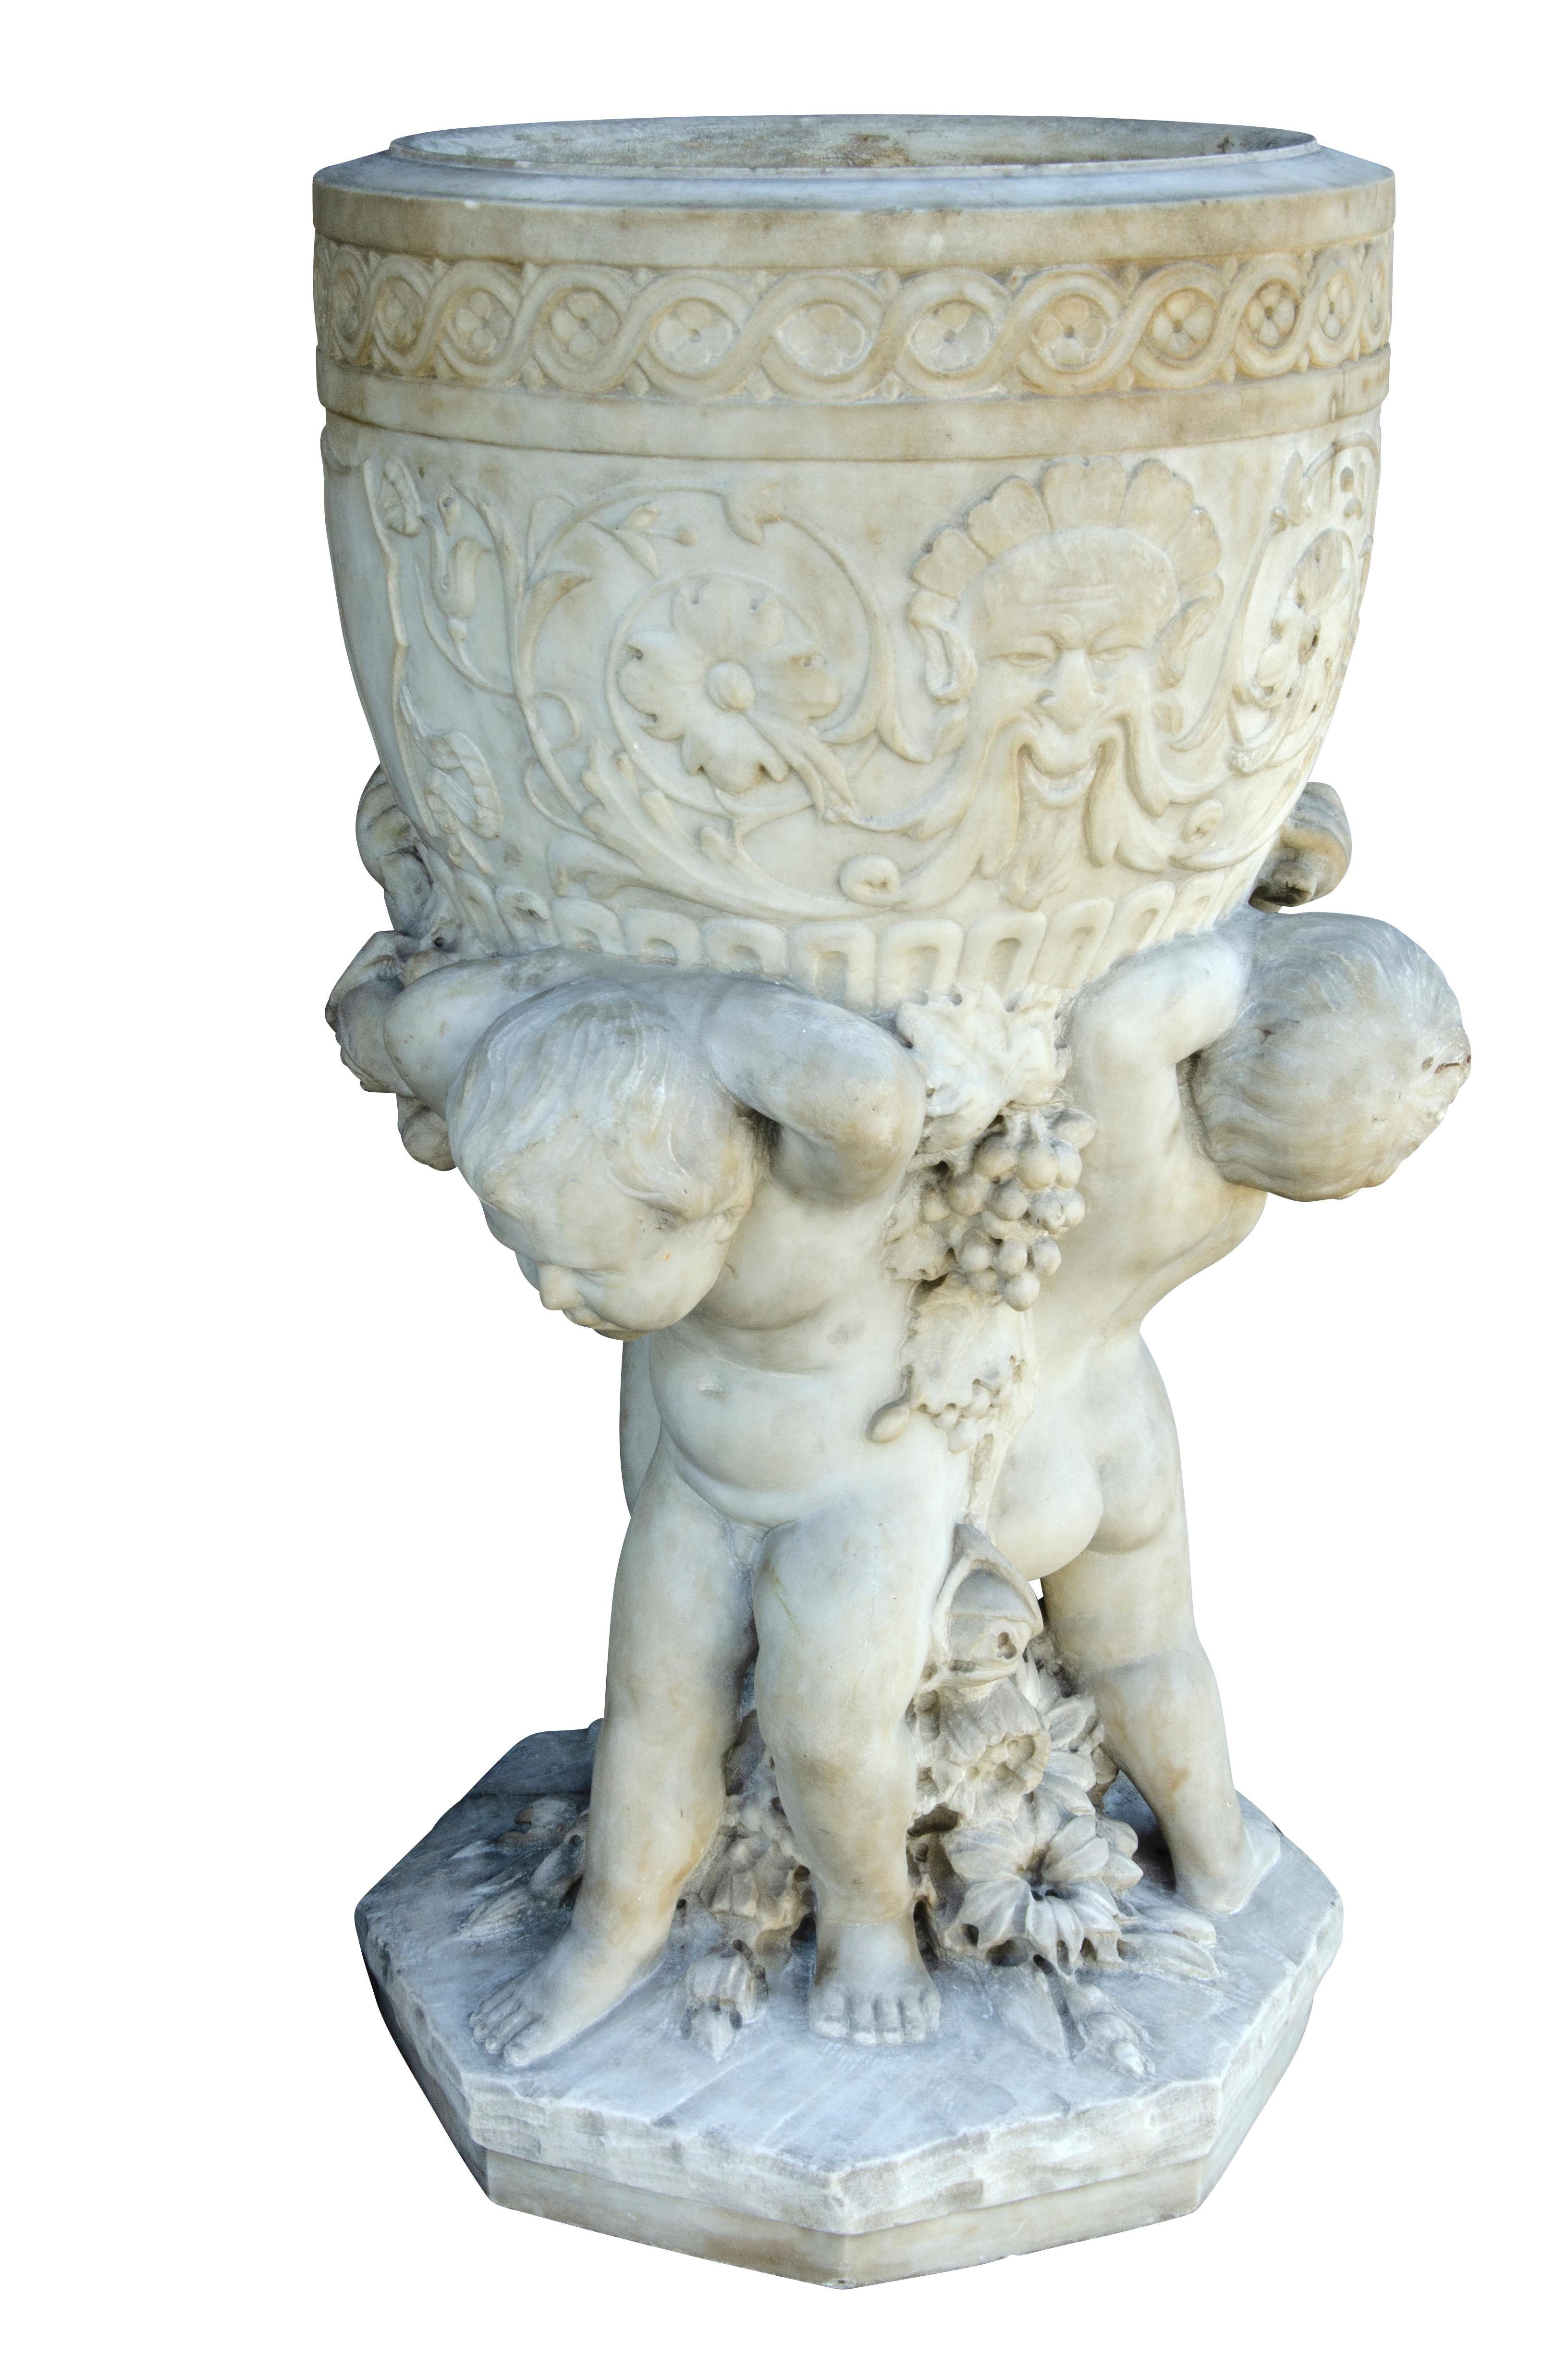 With three cherubs on an octagonal base supporting a finely carved urn.